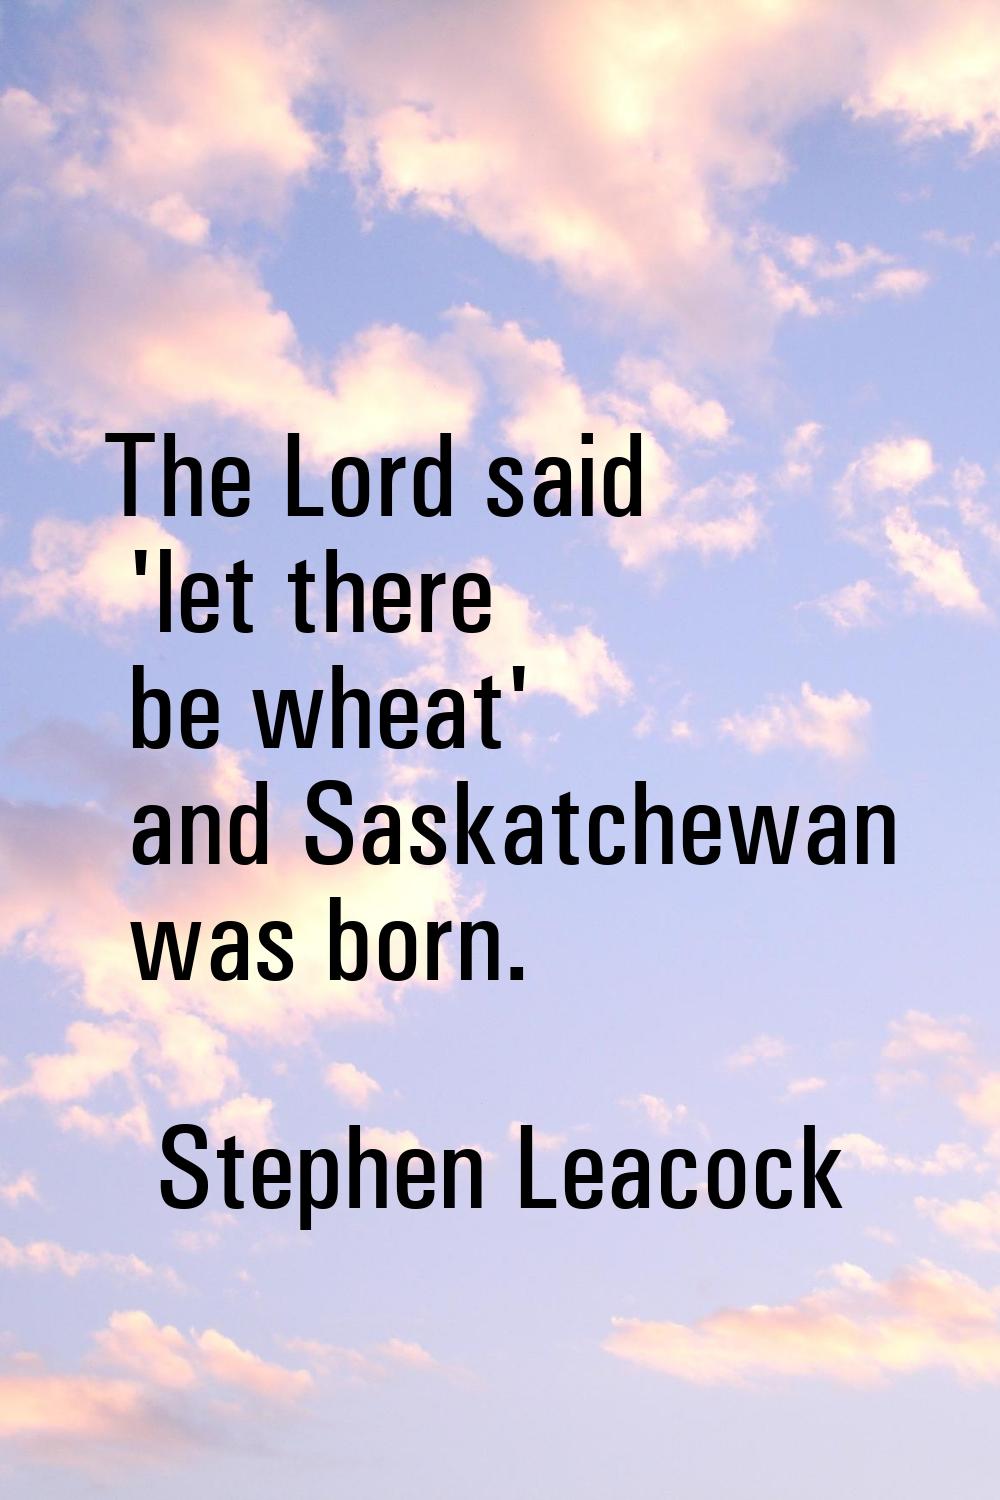 The Lord said 'let there be wheat' and Saskatchewan was born.